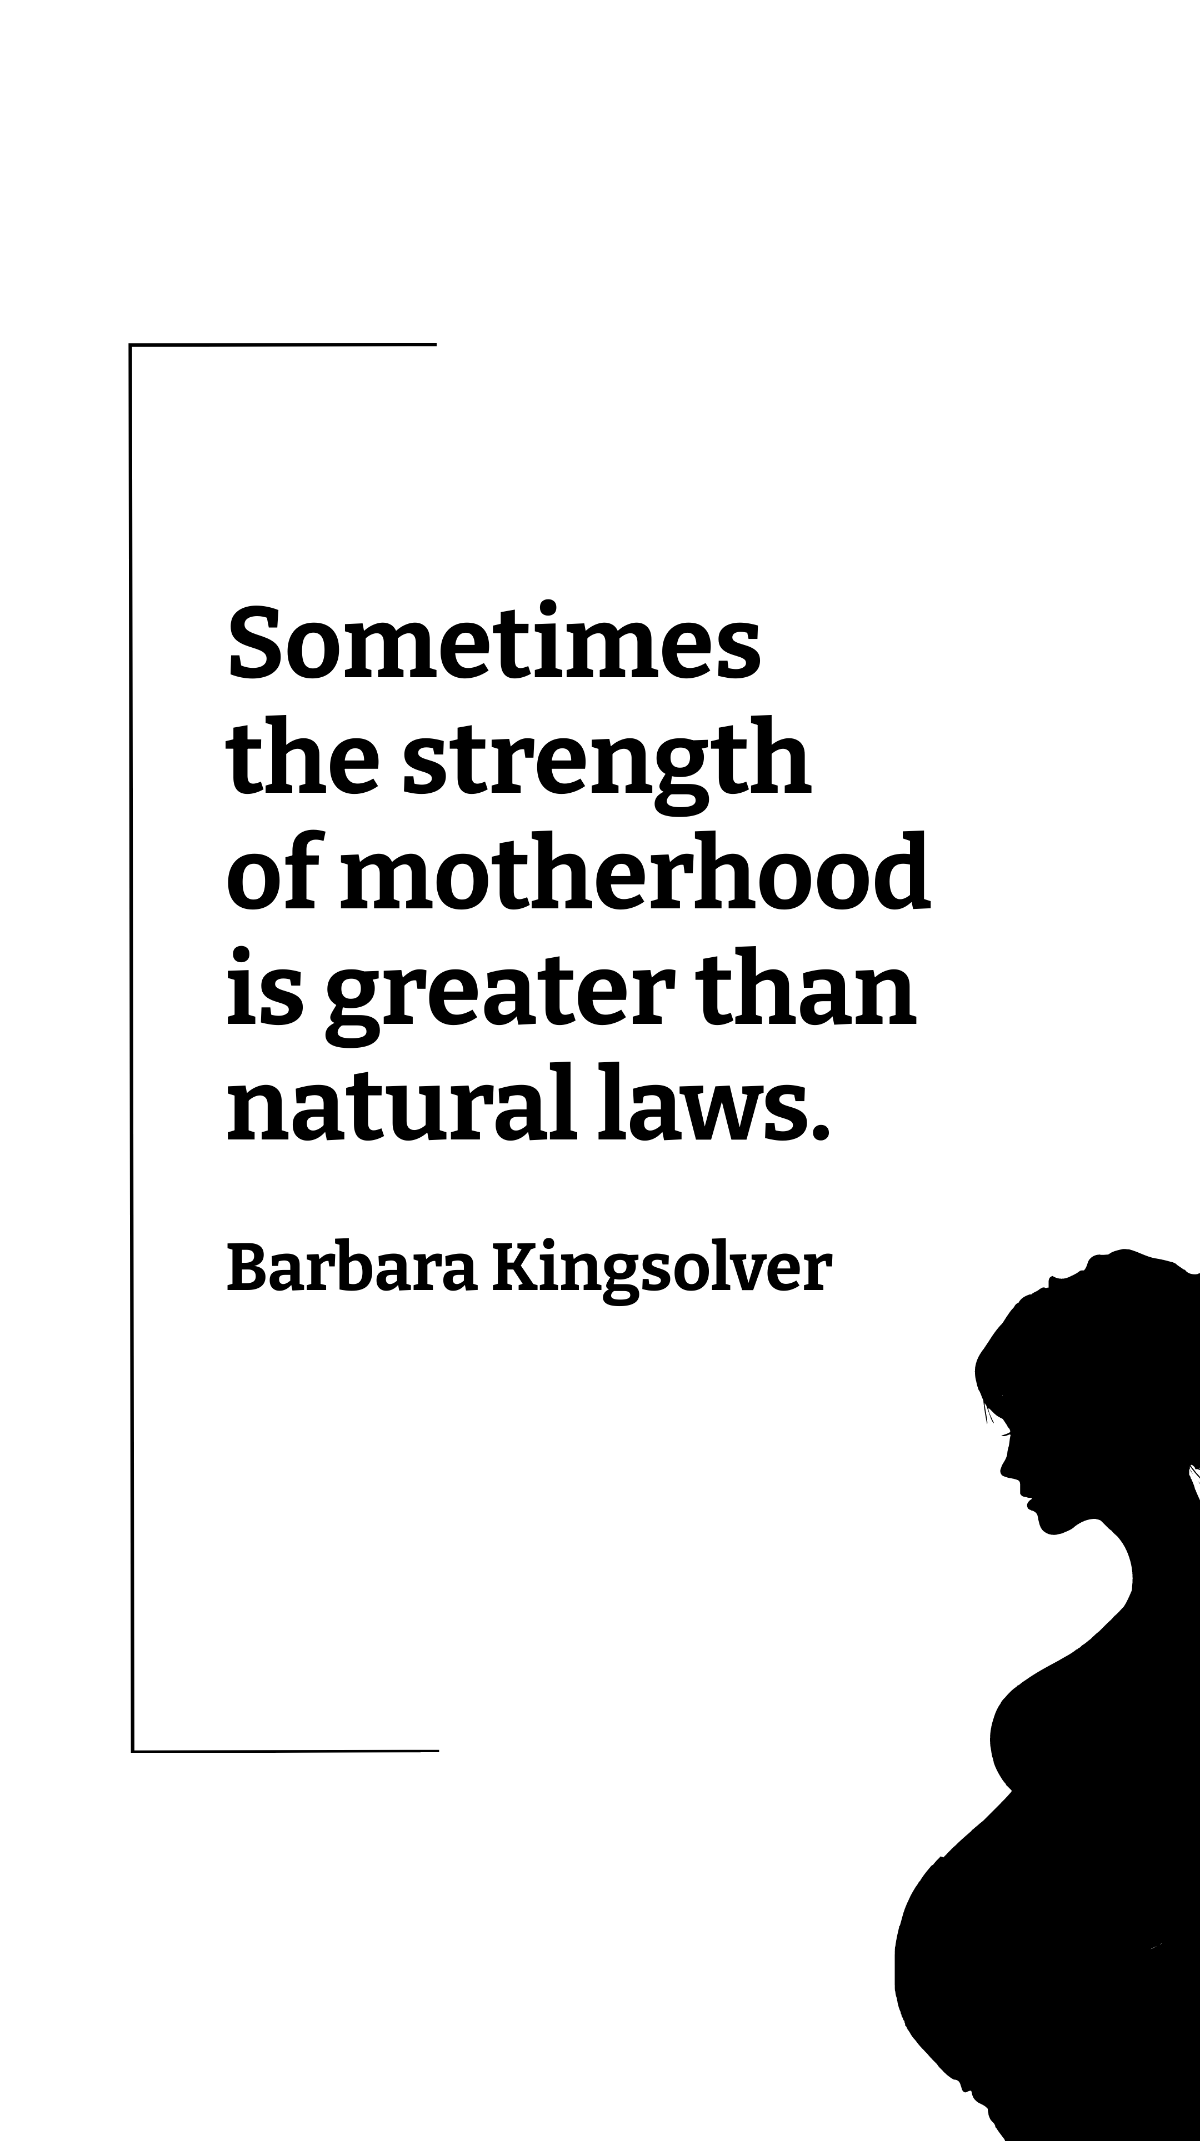 Barbara Kingsolver - Sometimes the strength of motherhood is greater than natural laws. Template